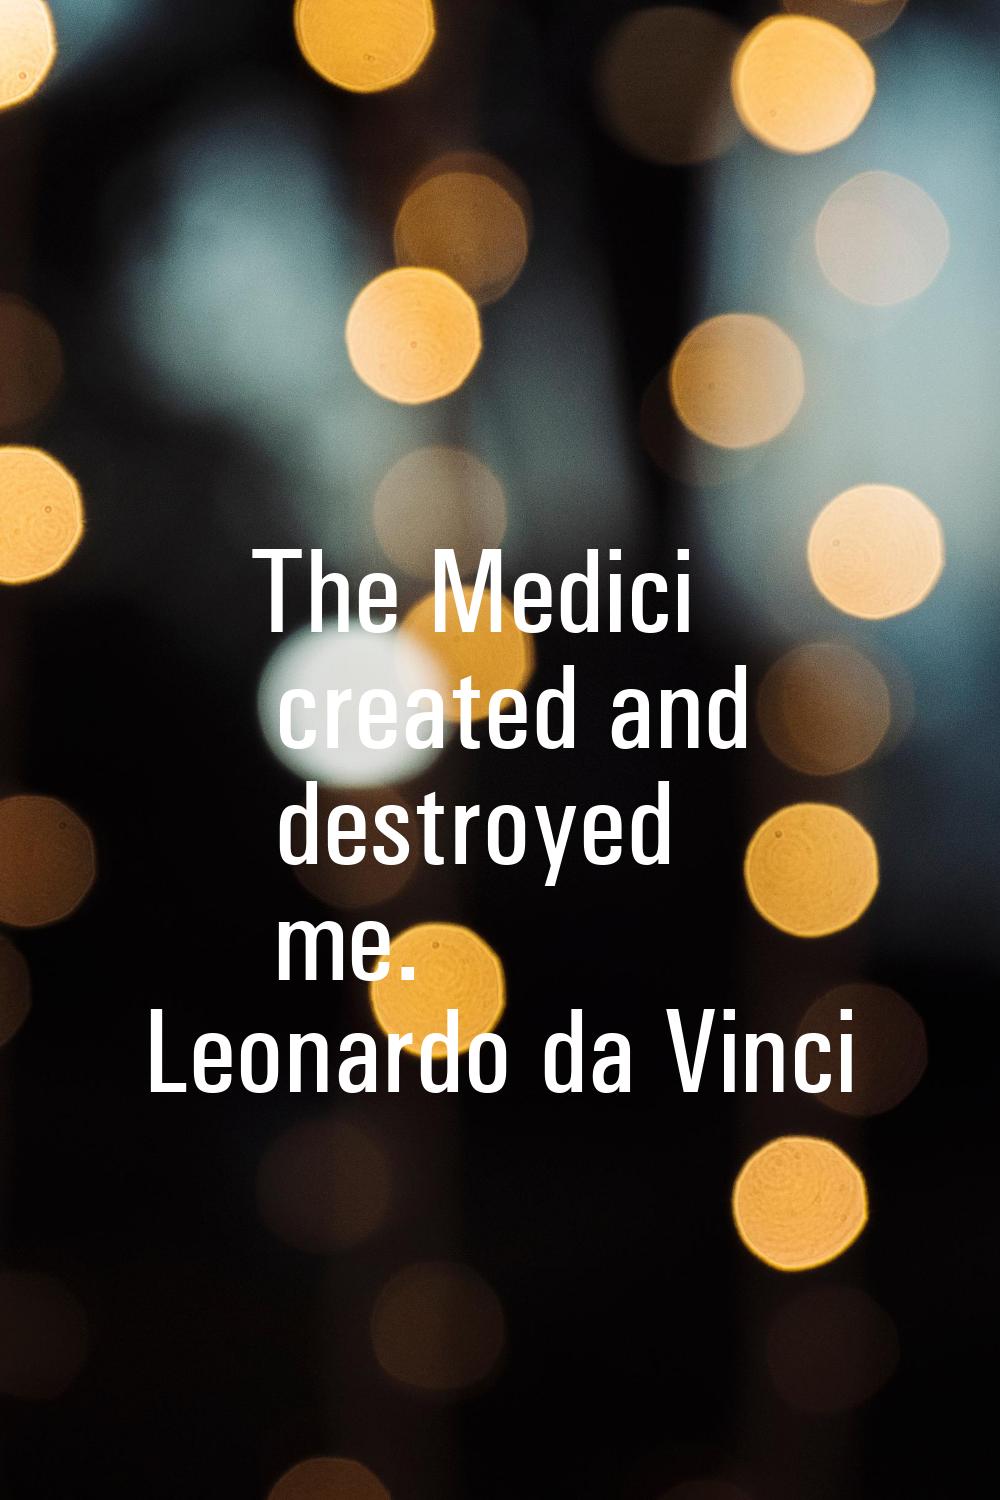 The Medici created and destroyed me.